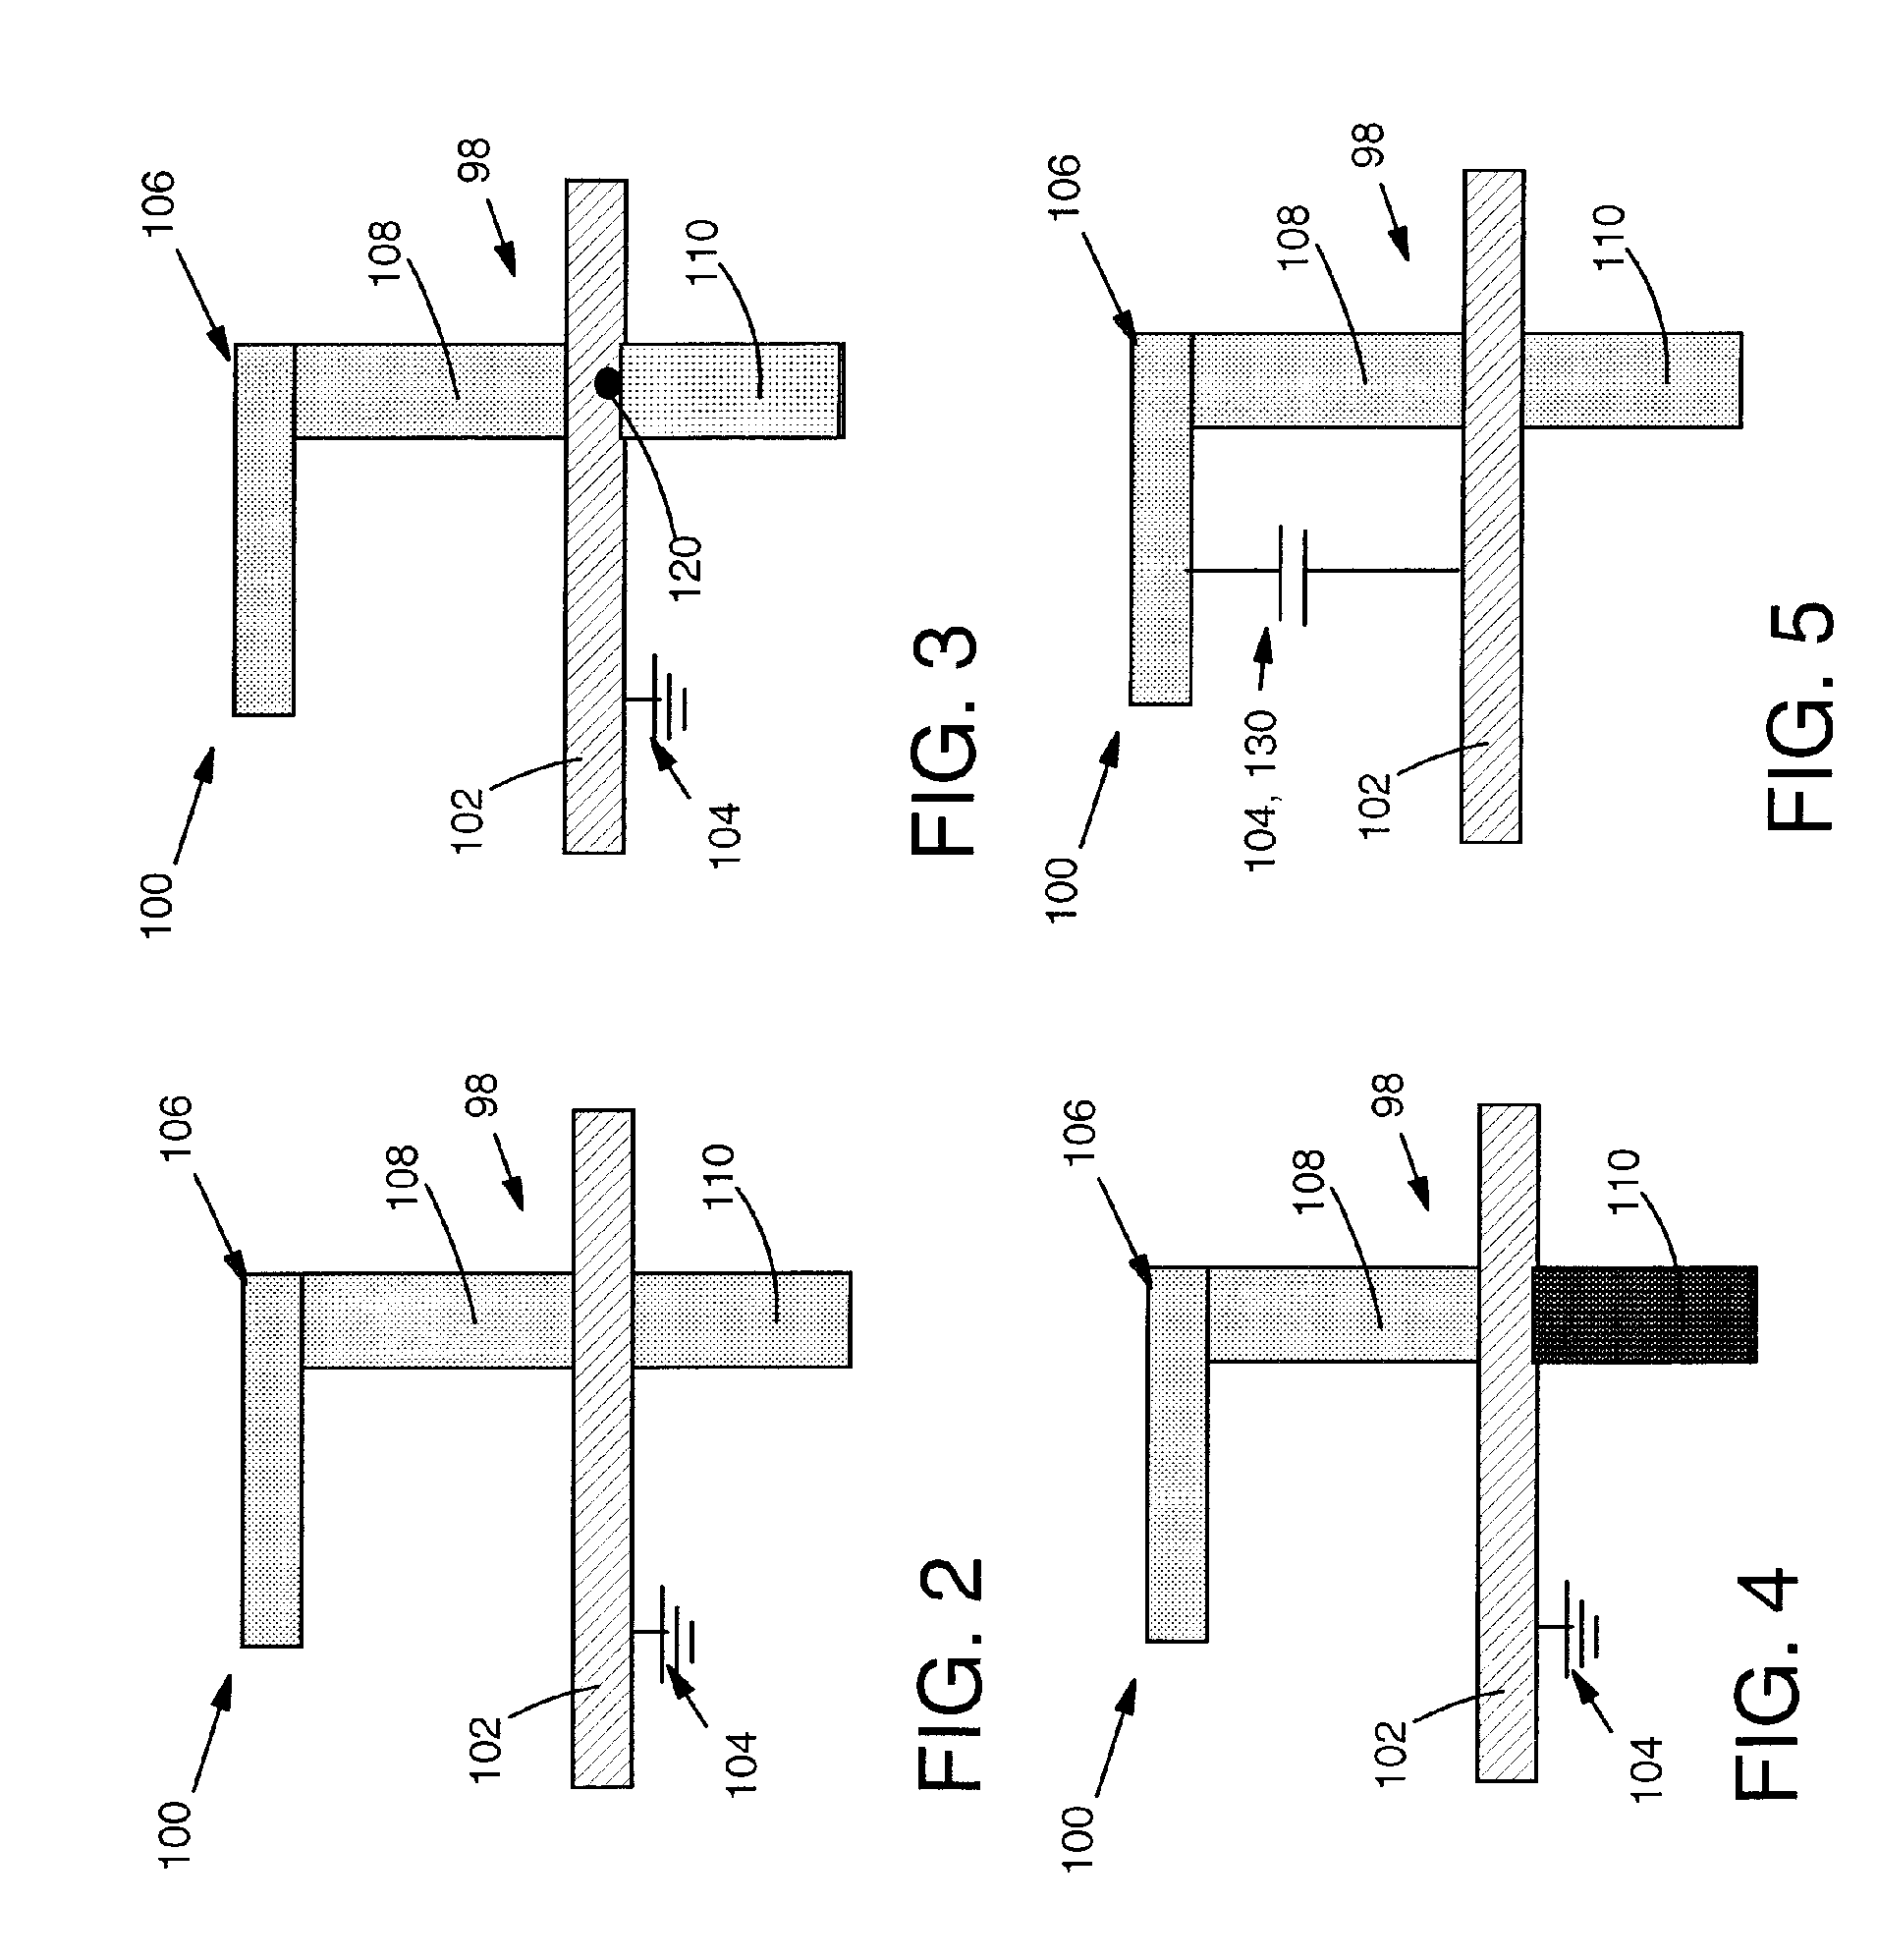 Test structures and method of defect detection using voltage contrast inspection